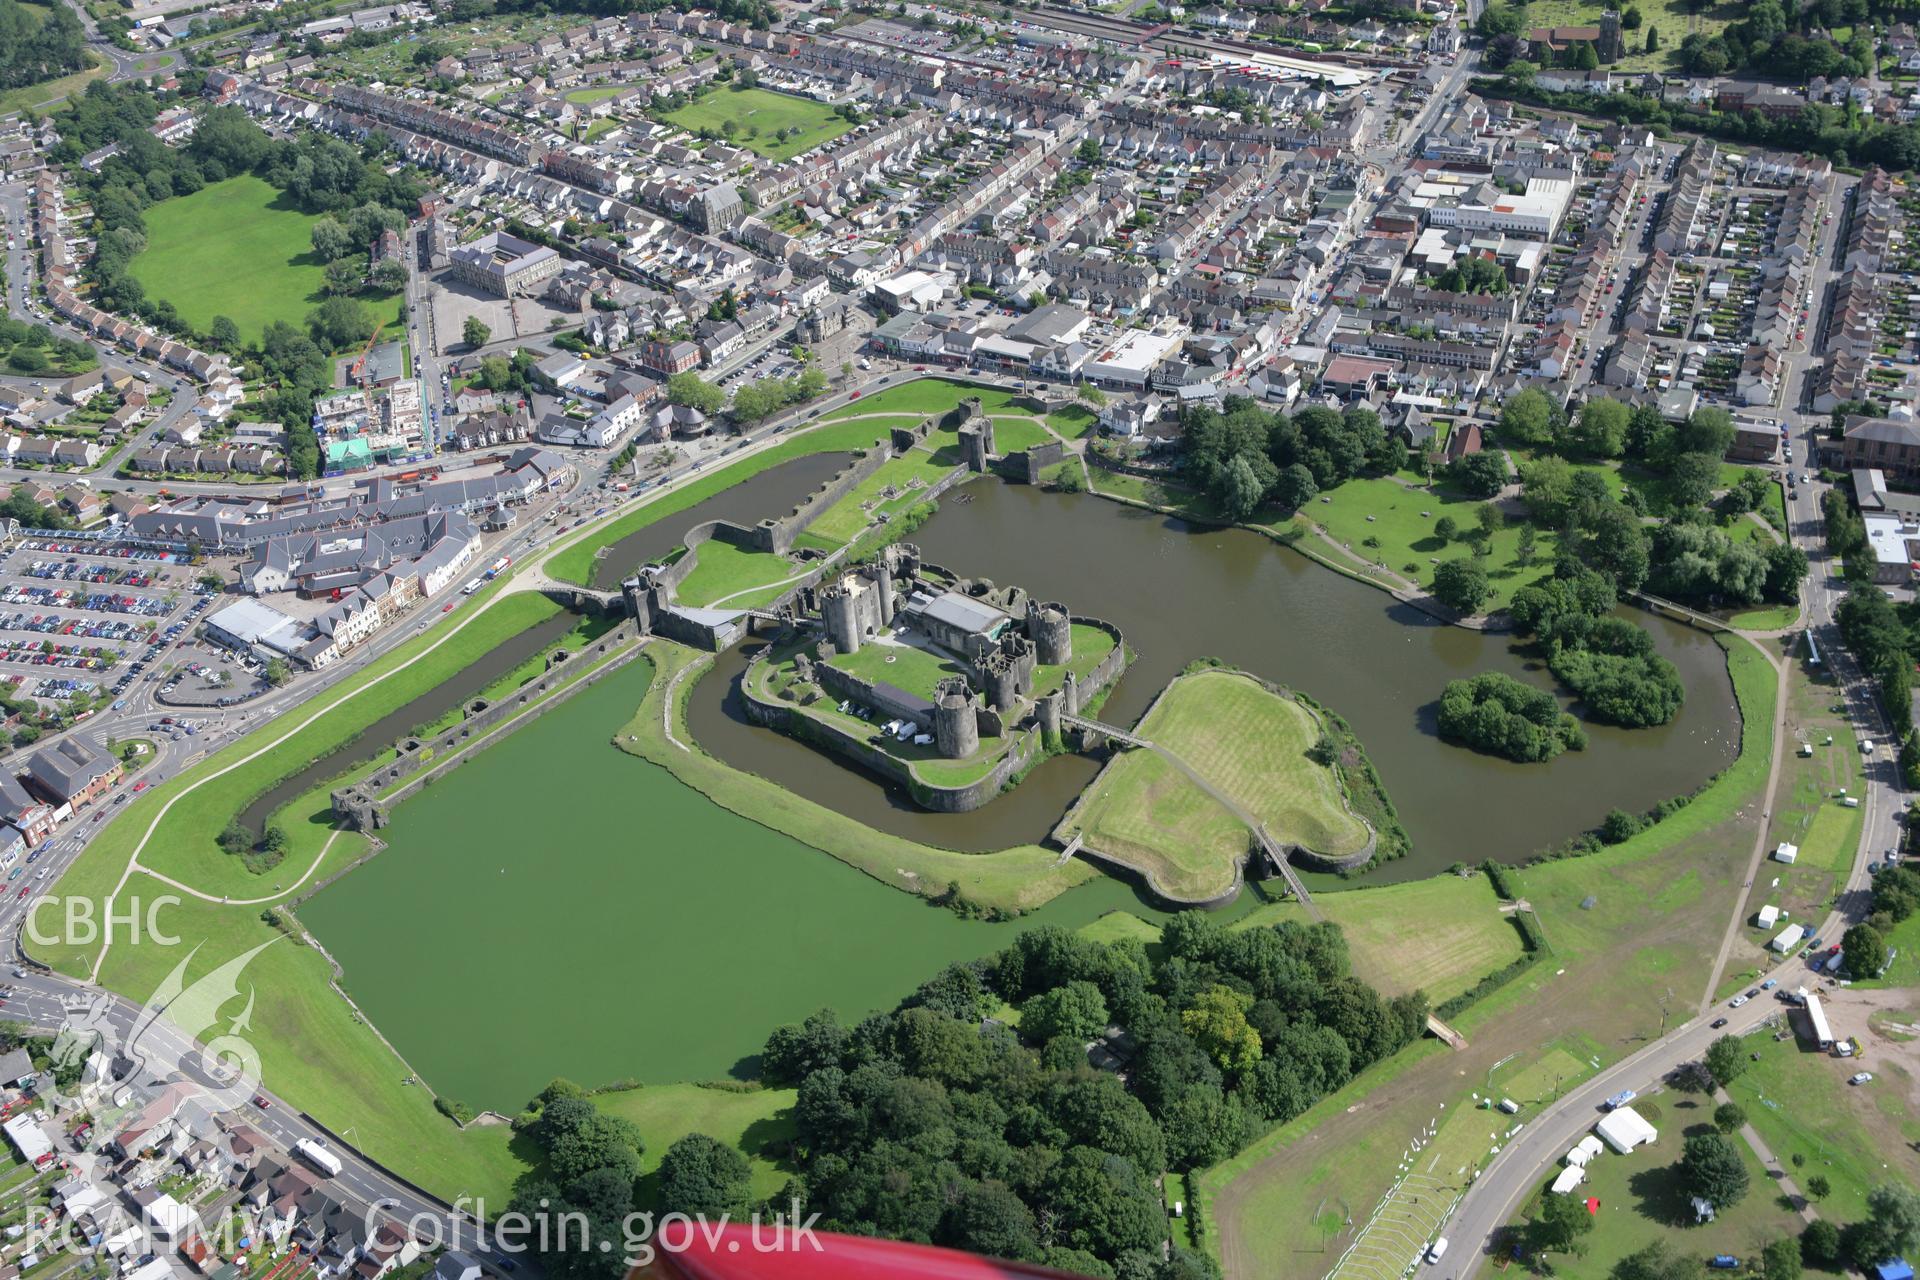 RCAHMW colour oblique aerial photograph of Caerphilly Castle. A bright summer view. Taken on 30 July 2007 by Toby Driver